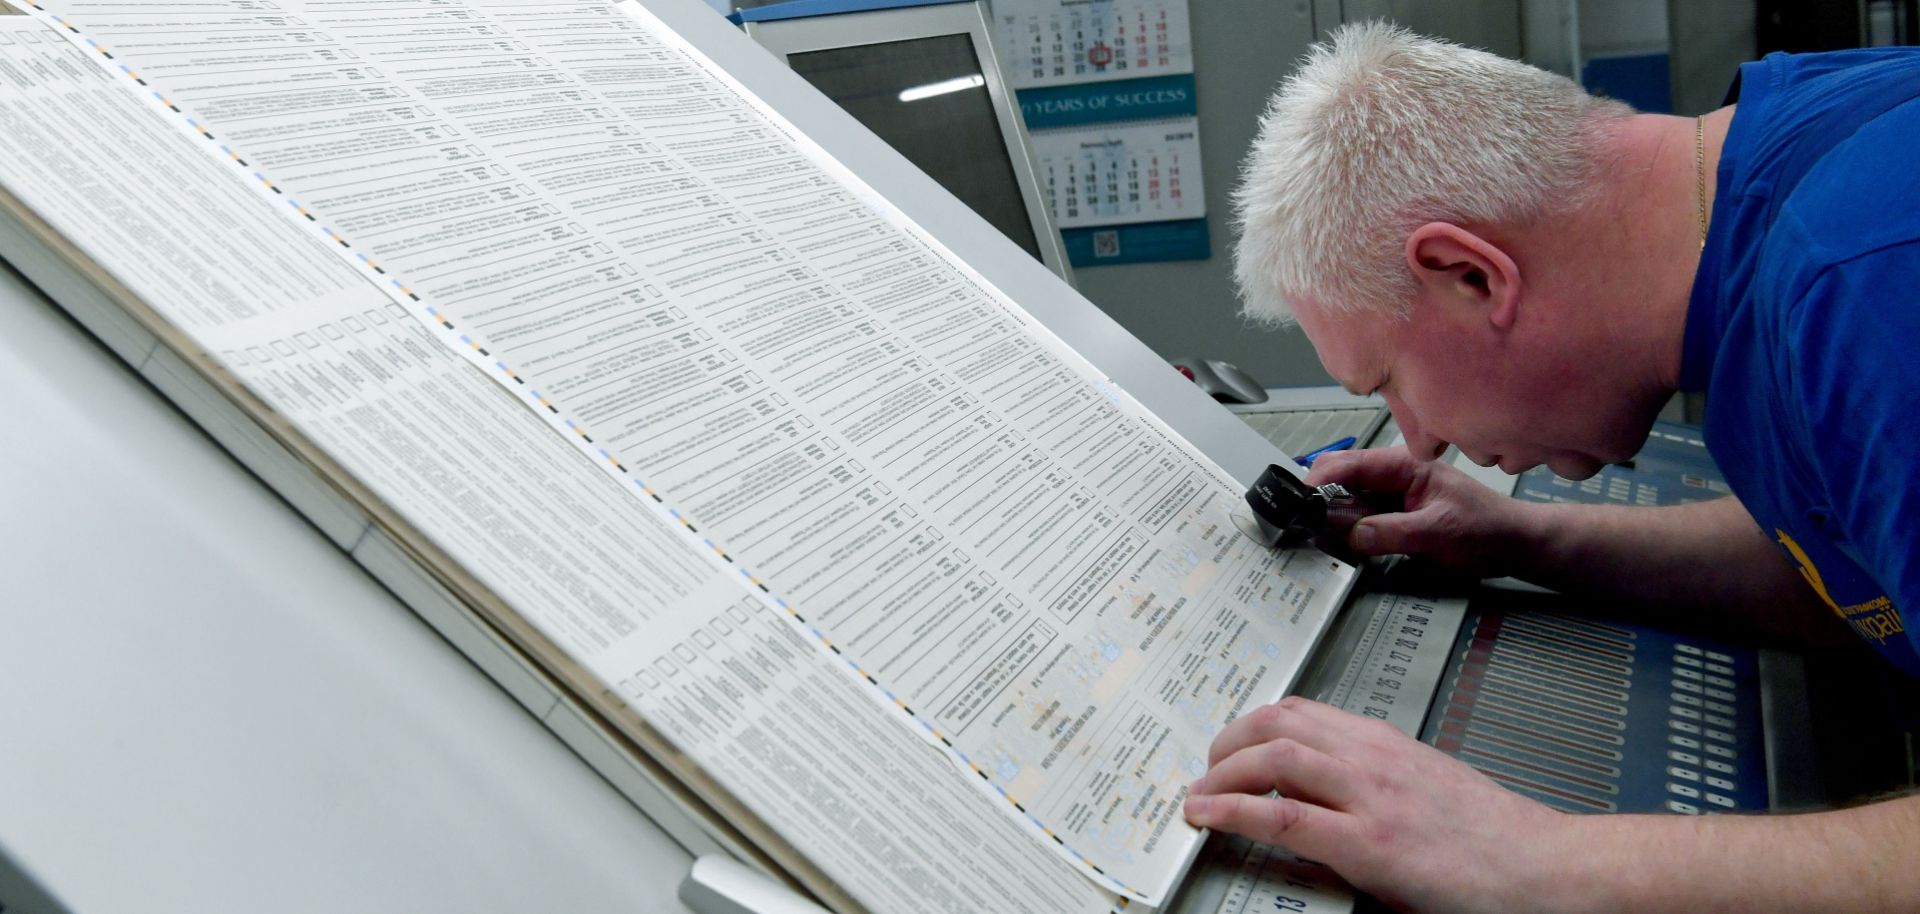 An employee of a printing plant in Kiev, Ukraine, checks ballots on March 21, 2019. Ukrainians choose their next president on March 31.